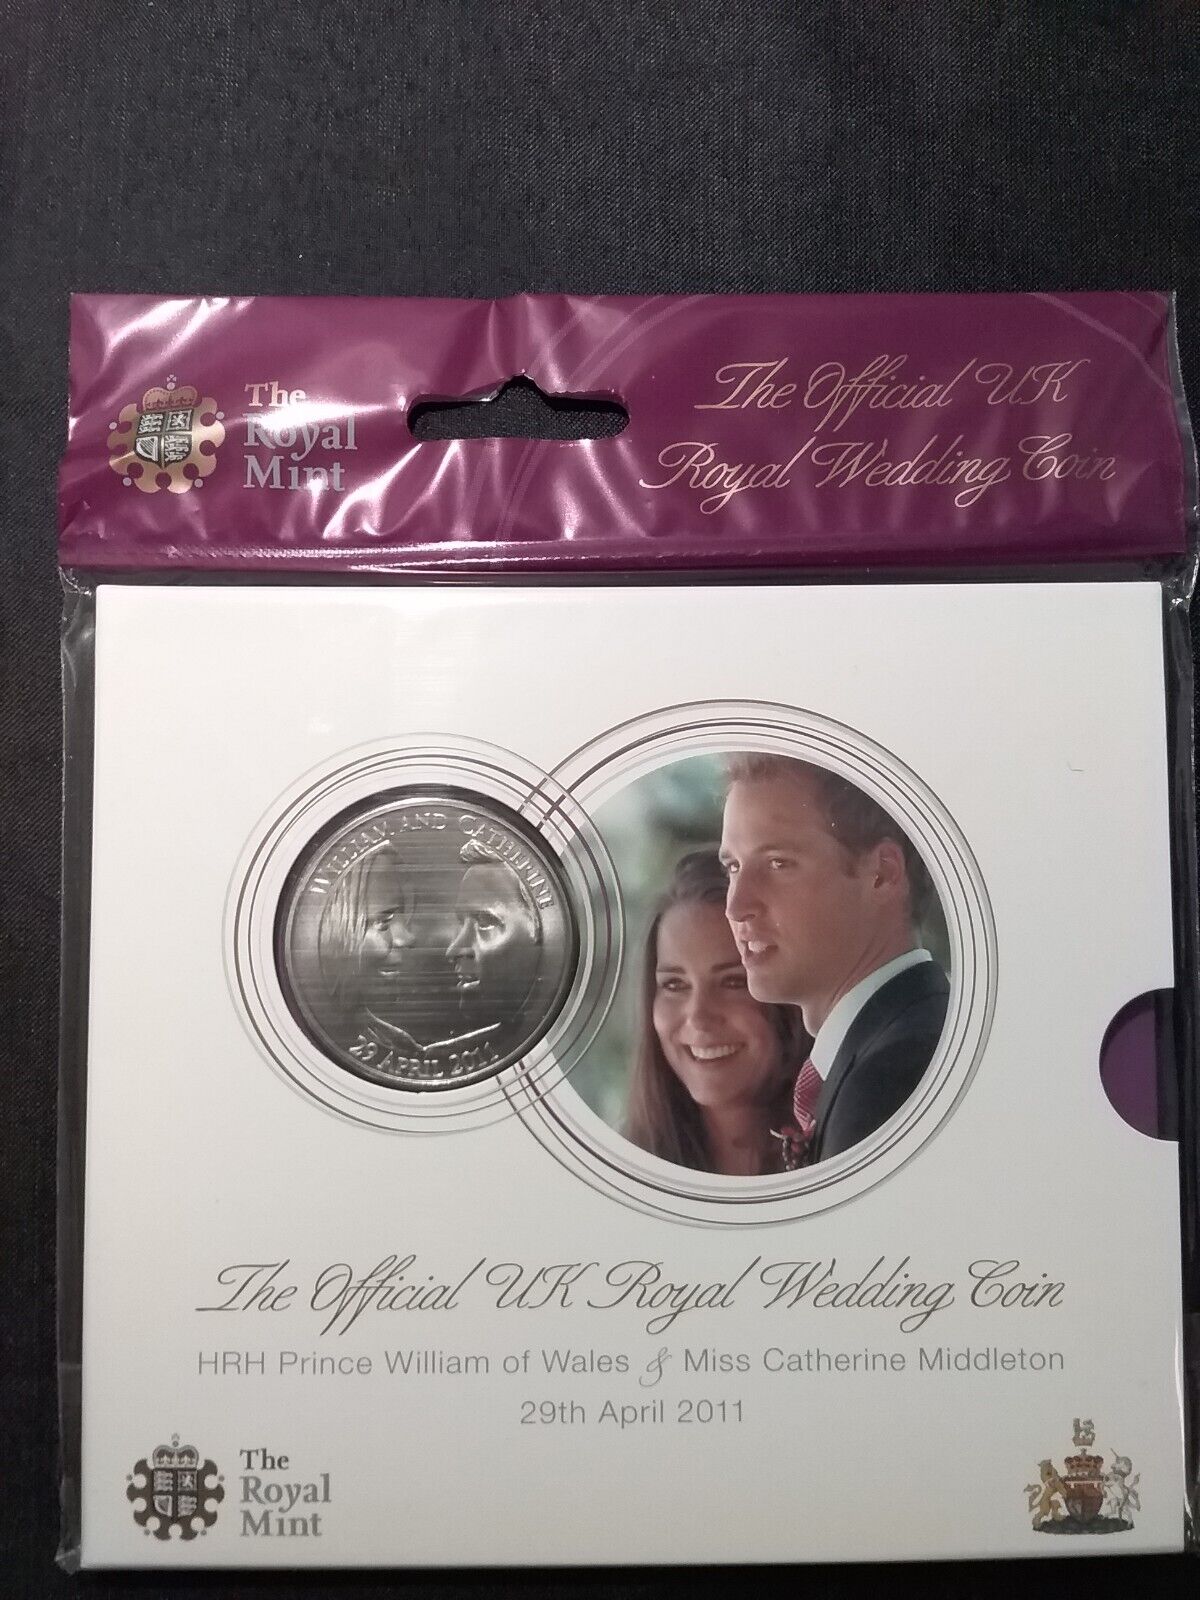 THE OFFICAL U.K. ROYAL WEDDING 2011 COIN PRINCE WILLIAM & KATE